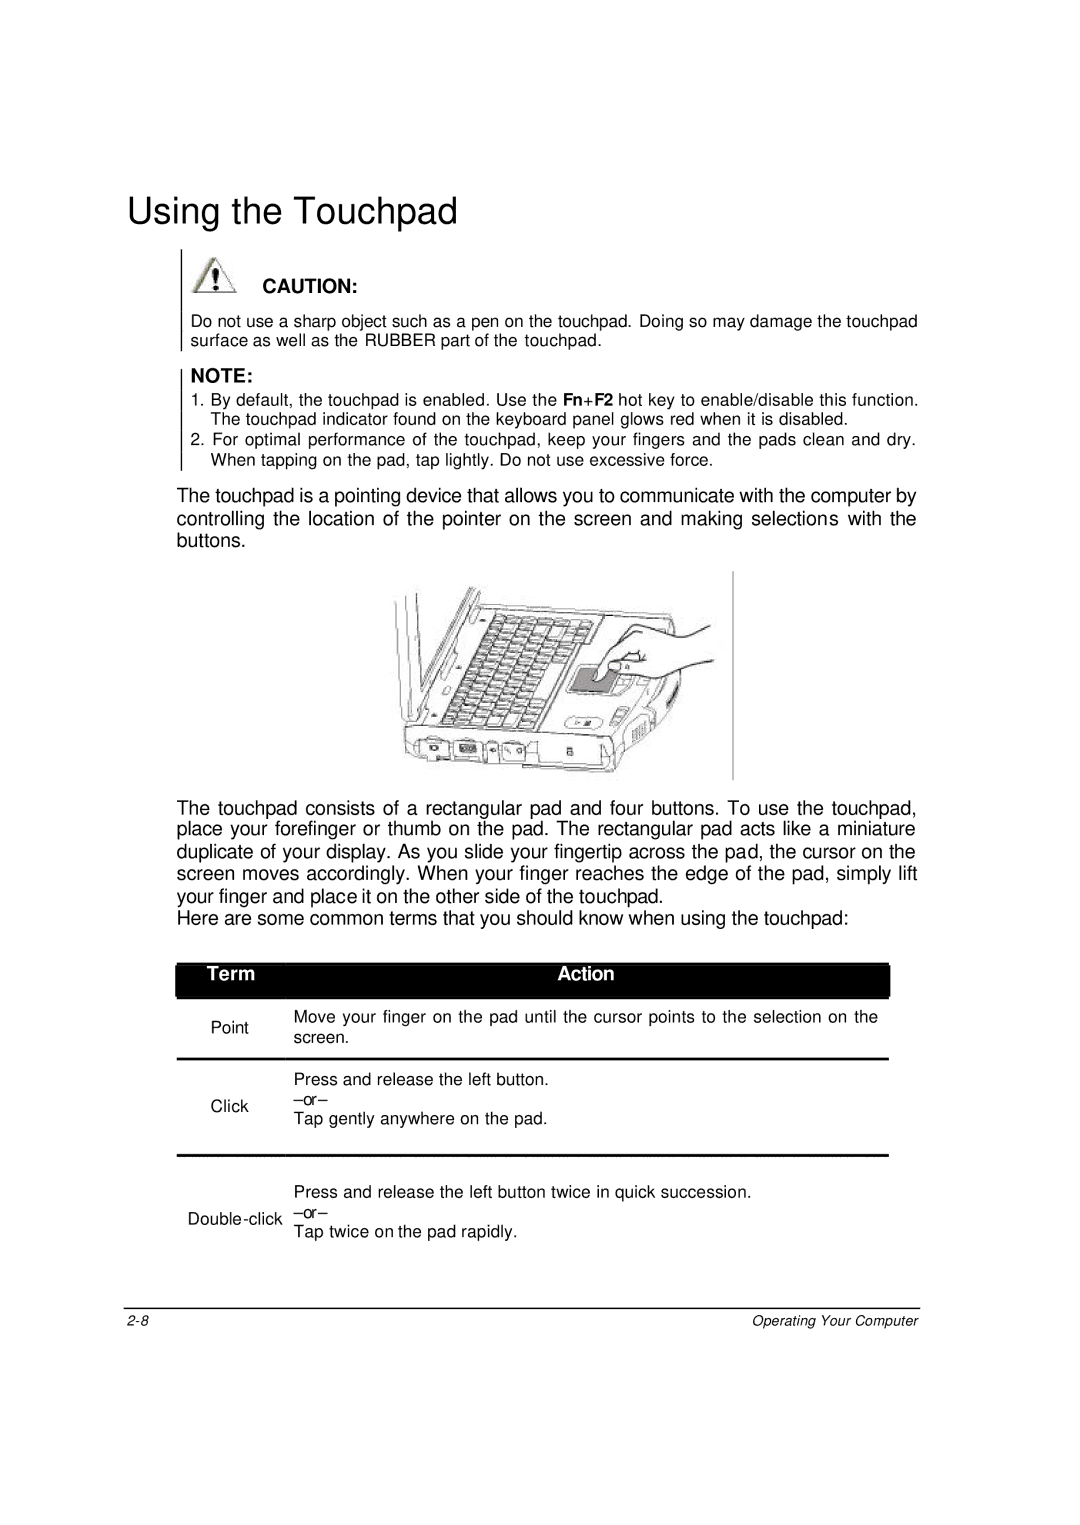 Motorola ML910 owner manual Using the Touchpad, Term Action 